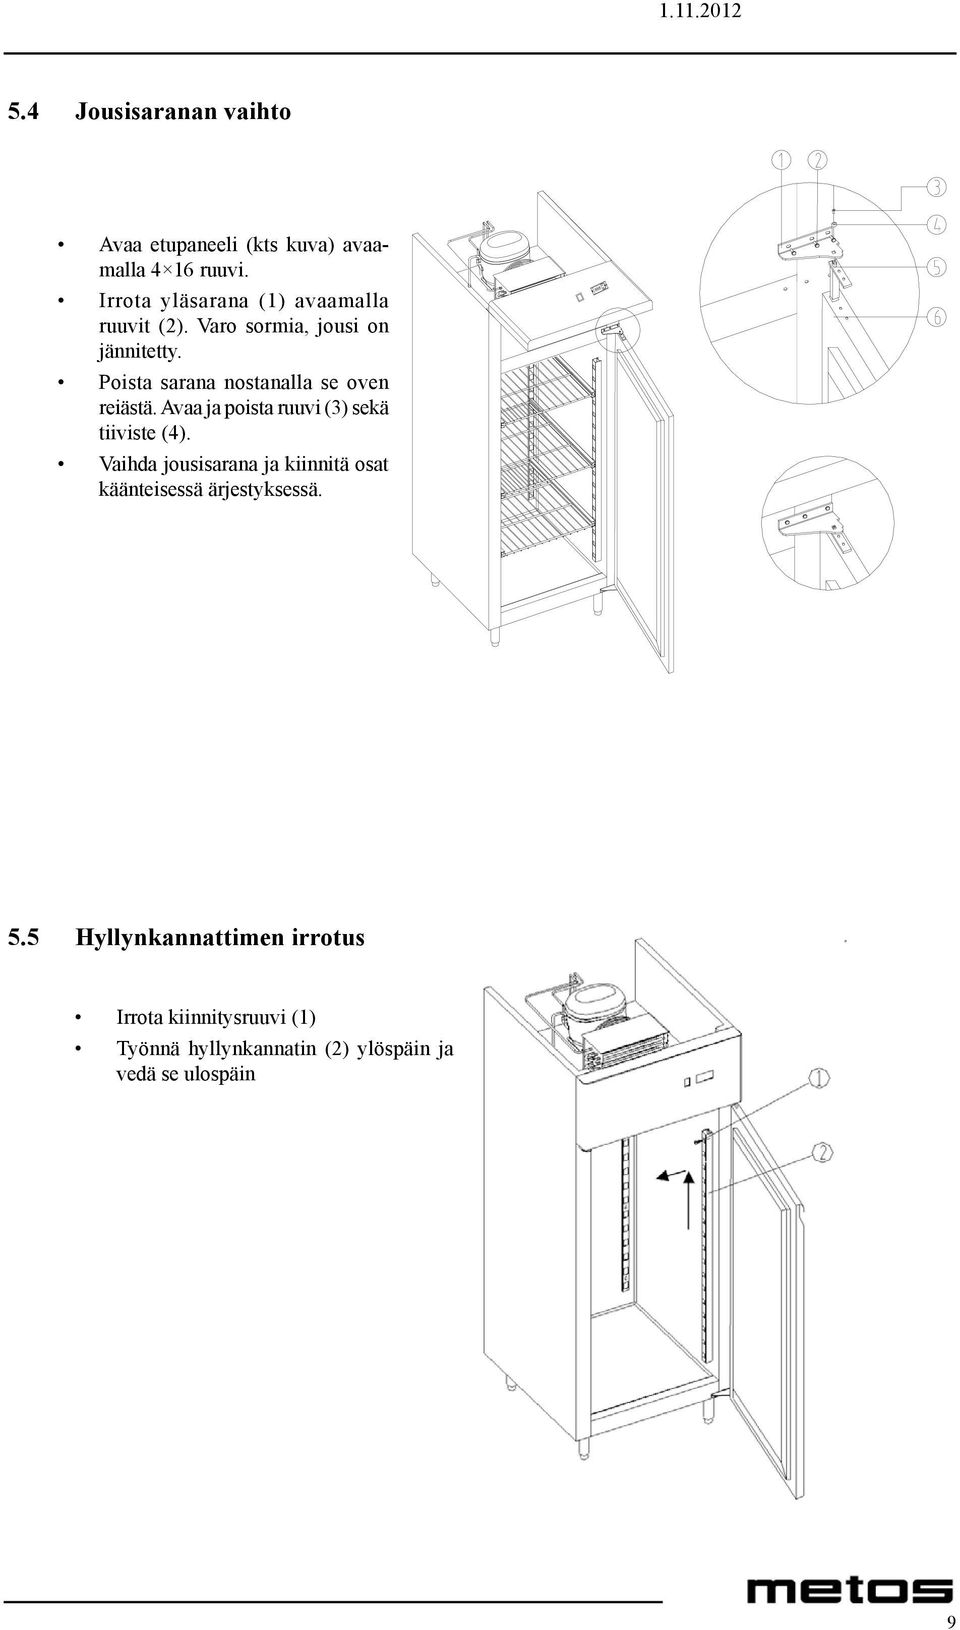 5 Hyllynkannattimen irrotus 1 First use cross screwdriver remove ST4 16 screw from front top cover and top panel,turn the Irrota kiinnitysruuvi (1) front top cover as the drawing.